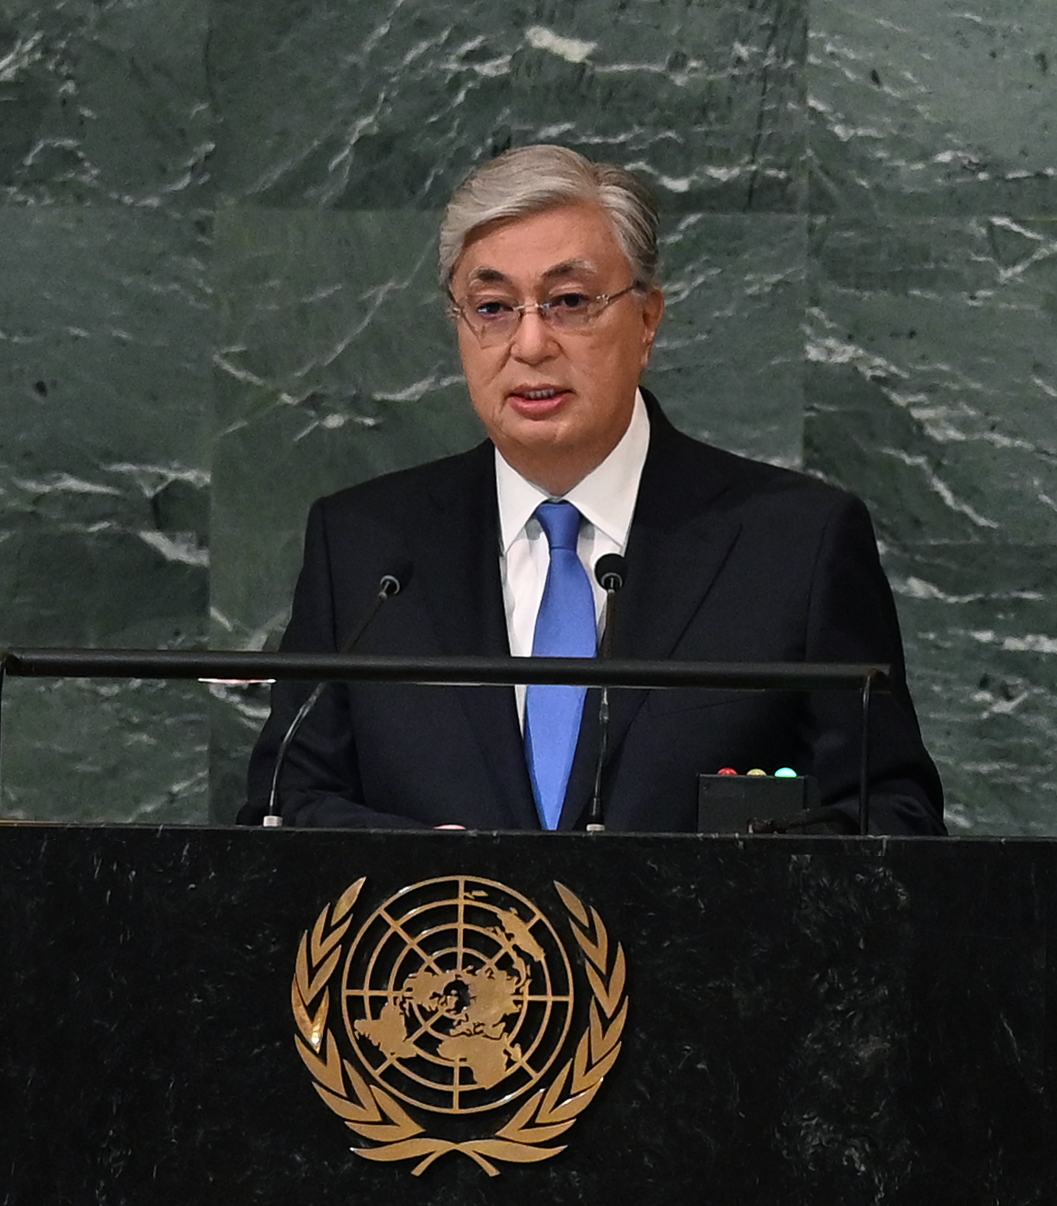 President of Kazakhstan Kassym-Jomart Tokayev delivered a speech at the General Debate of the 77th session of the UN General Assembly